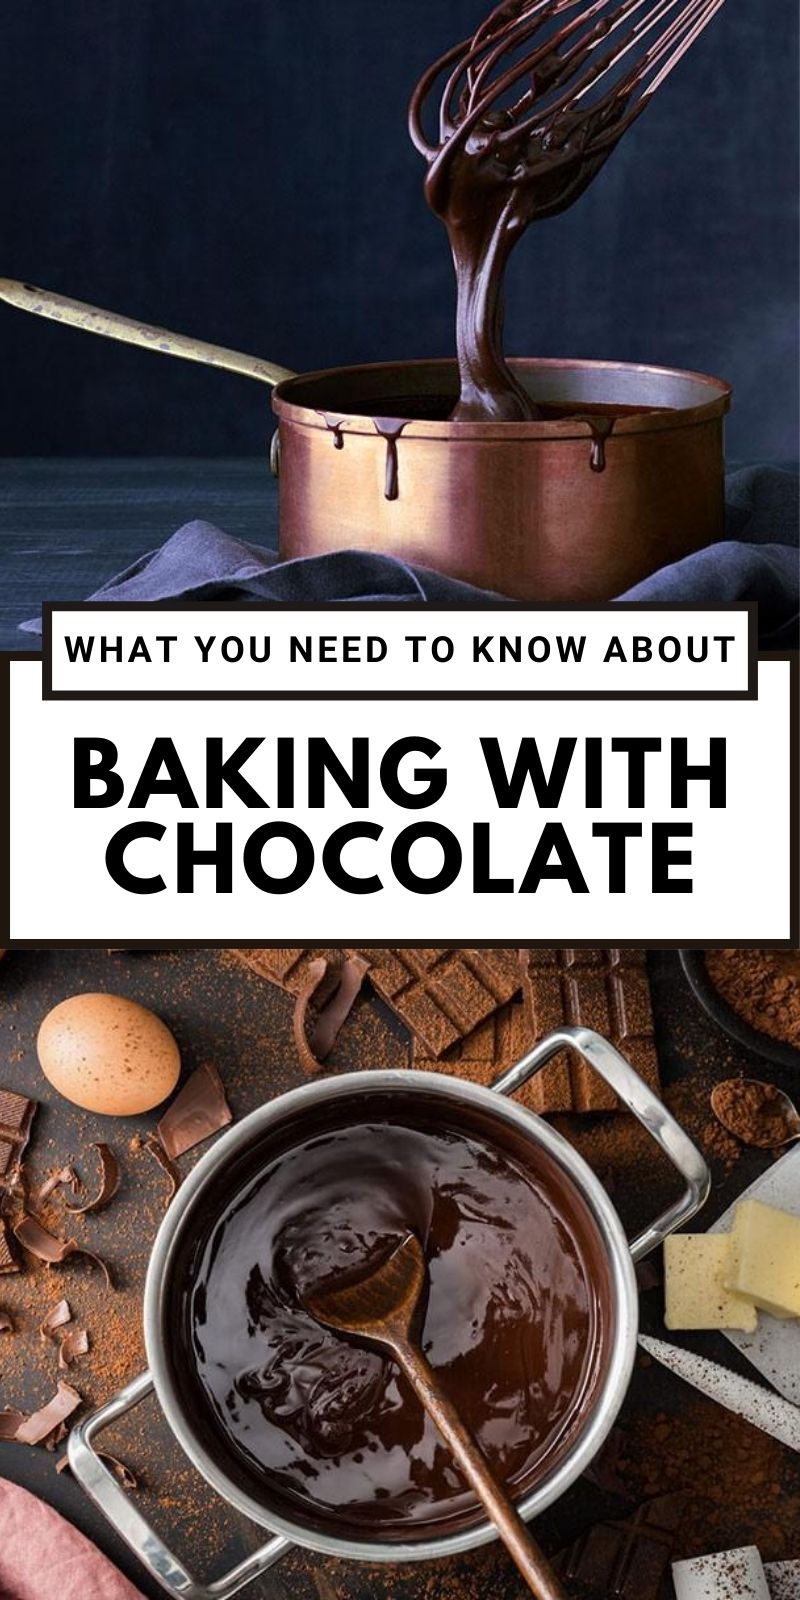 Baking with Chocolate